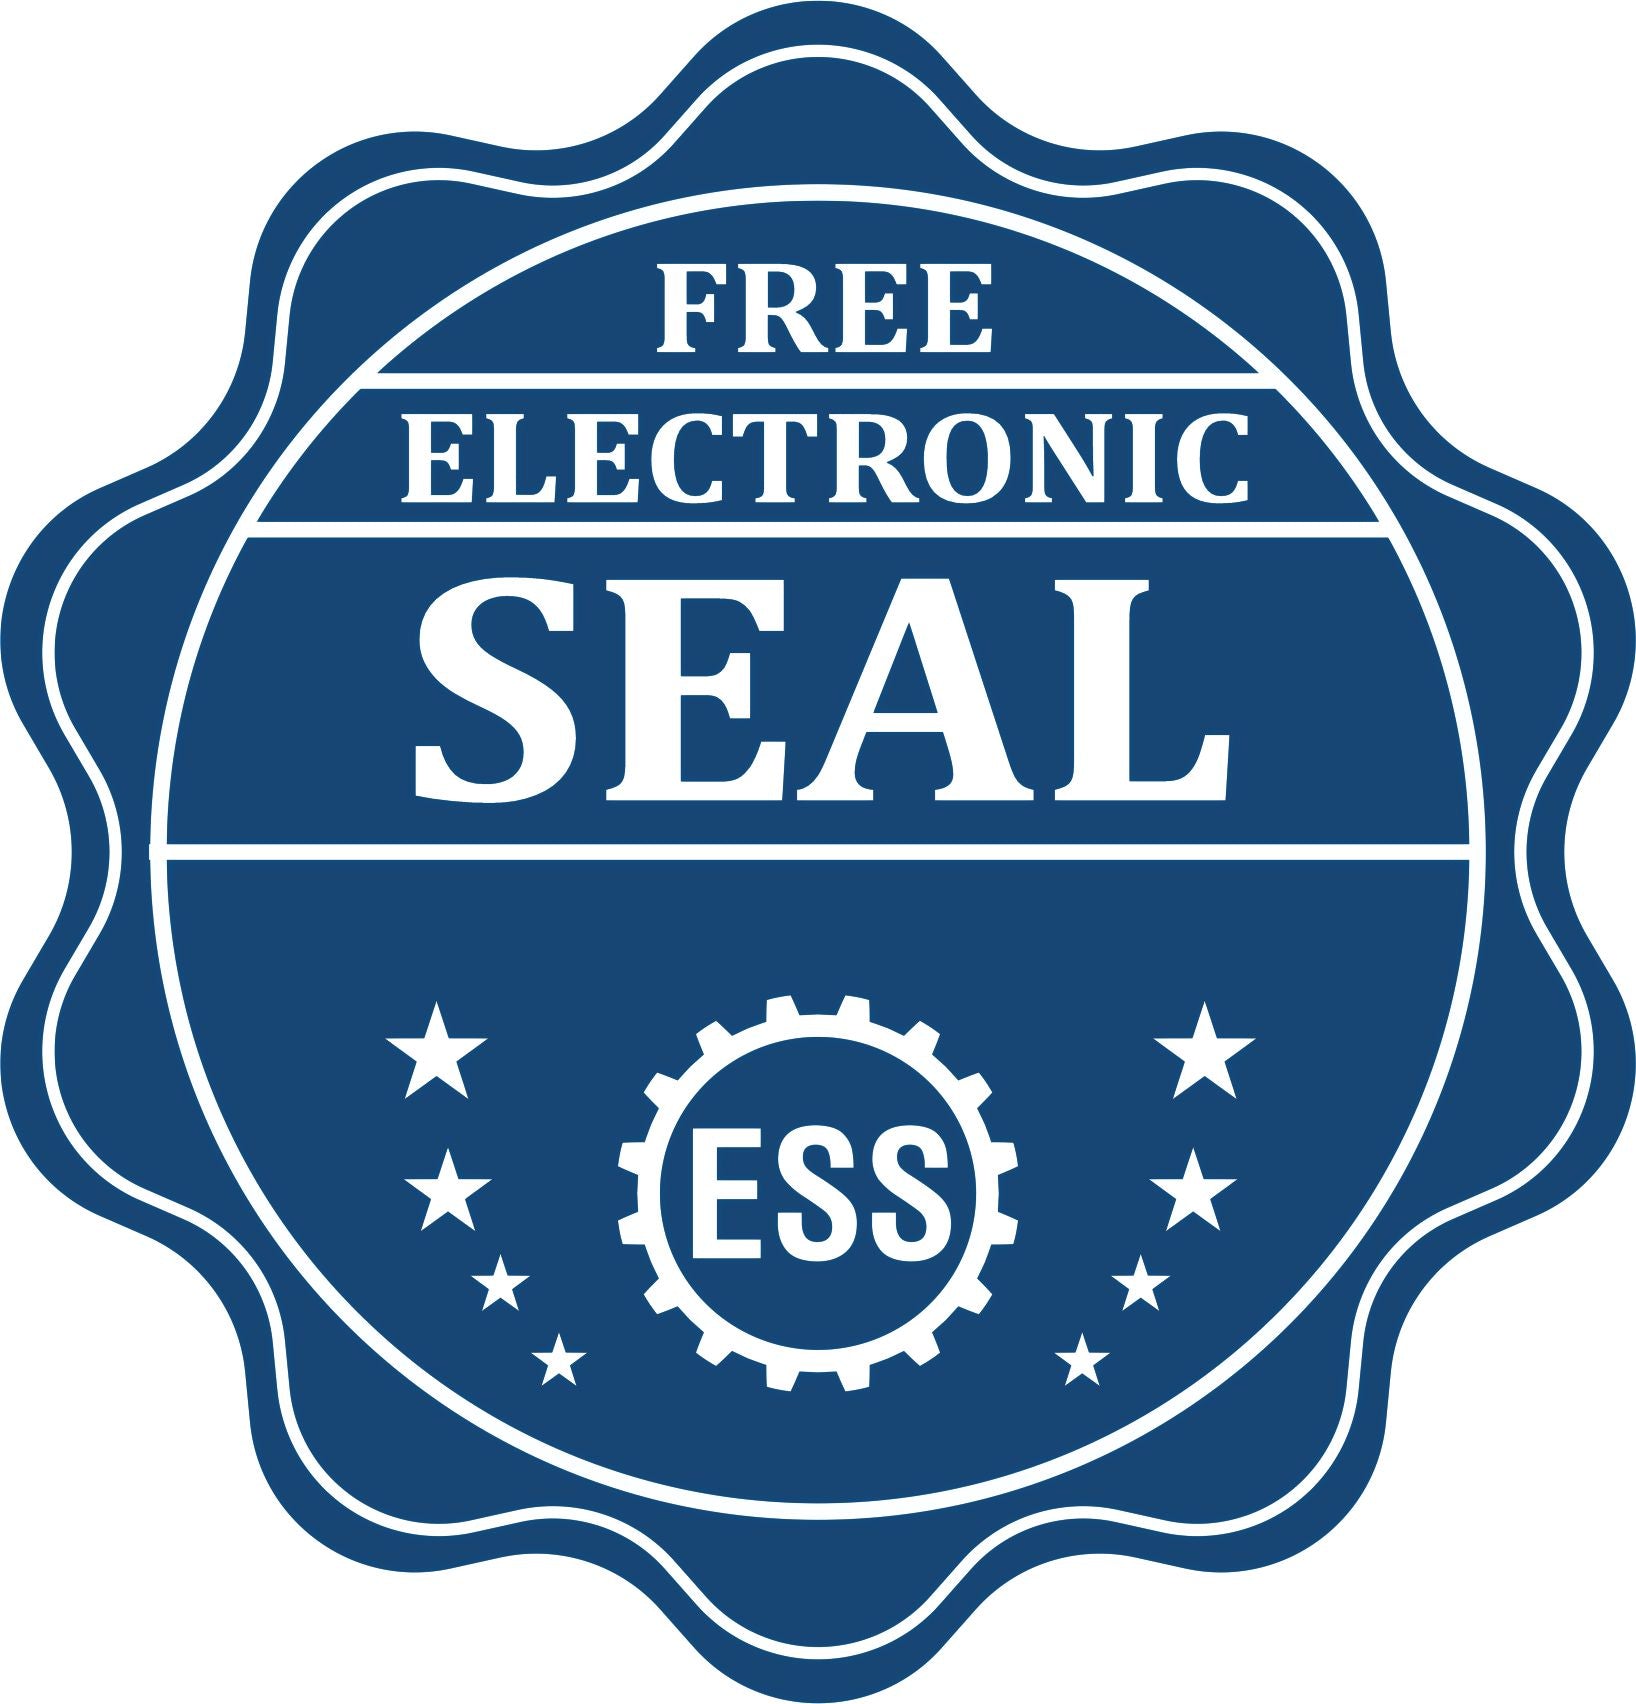 A badge showing a free electronic seal for the Handheld Alaska Land Surveyor Seal with stars and the ESS gear on the emblem.